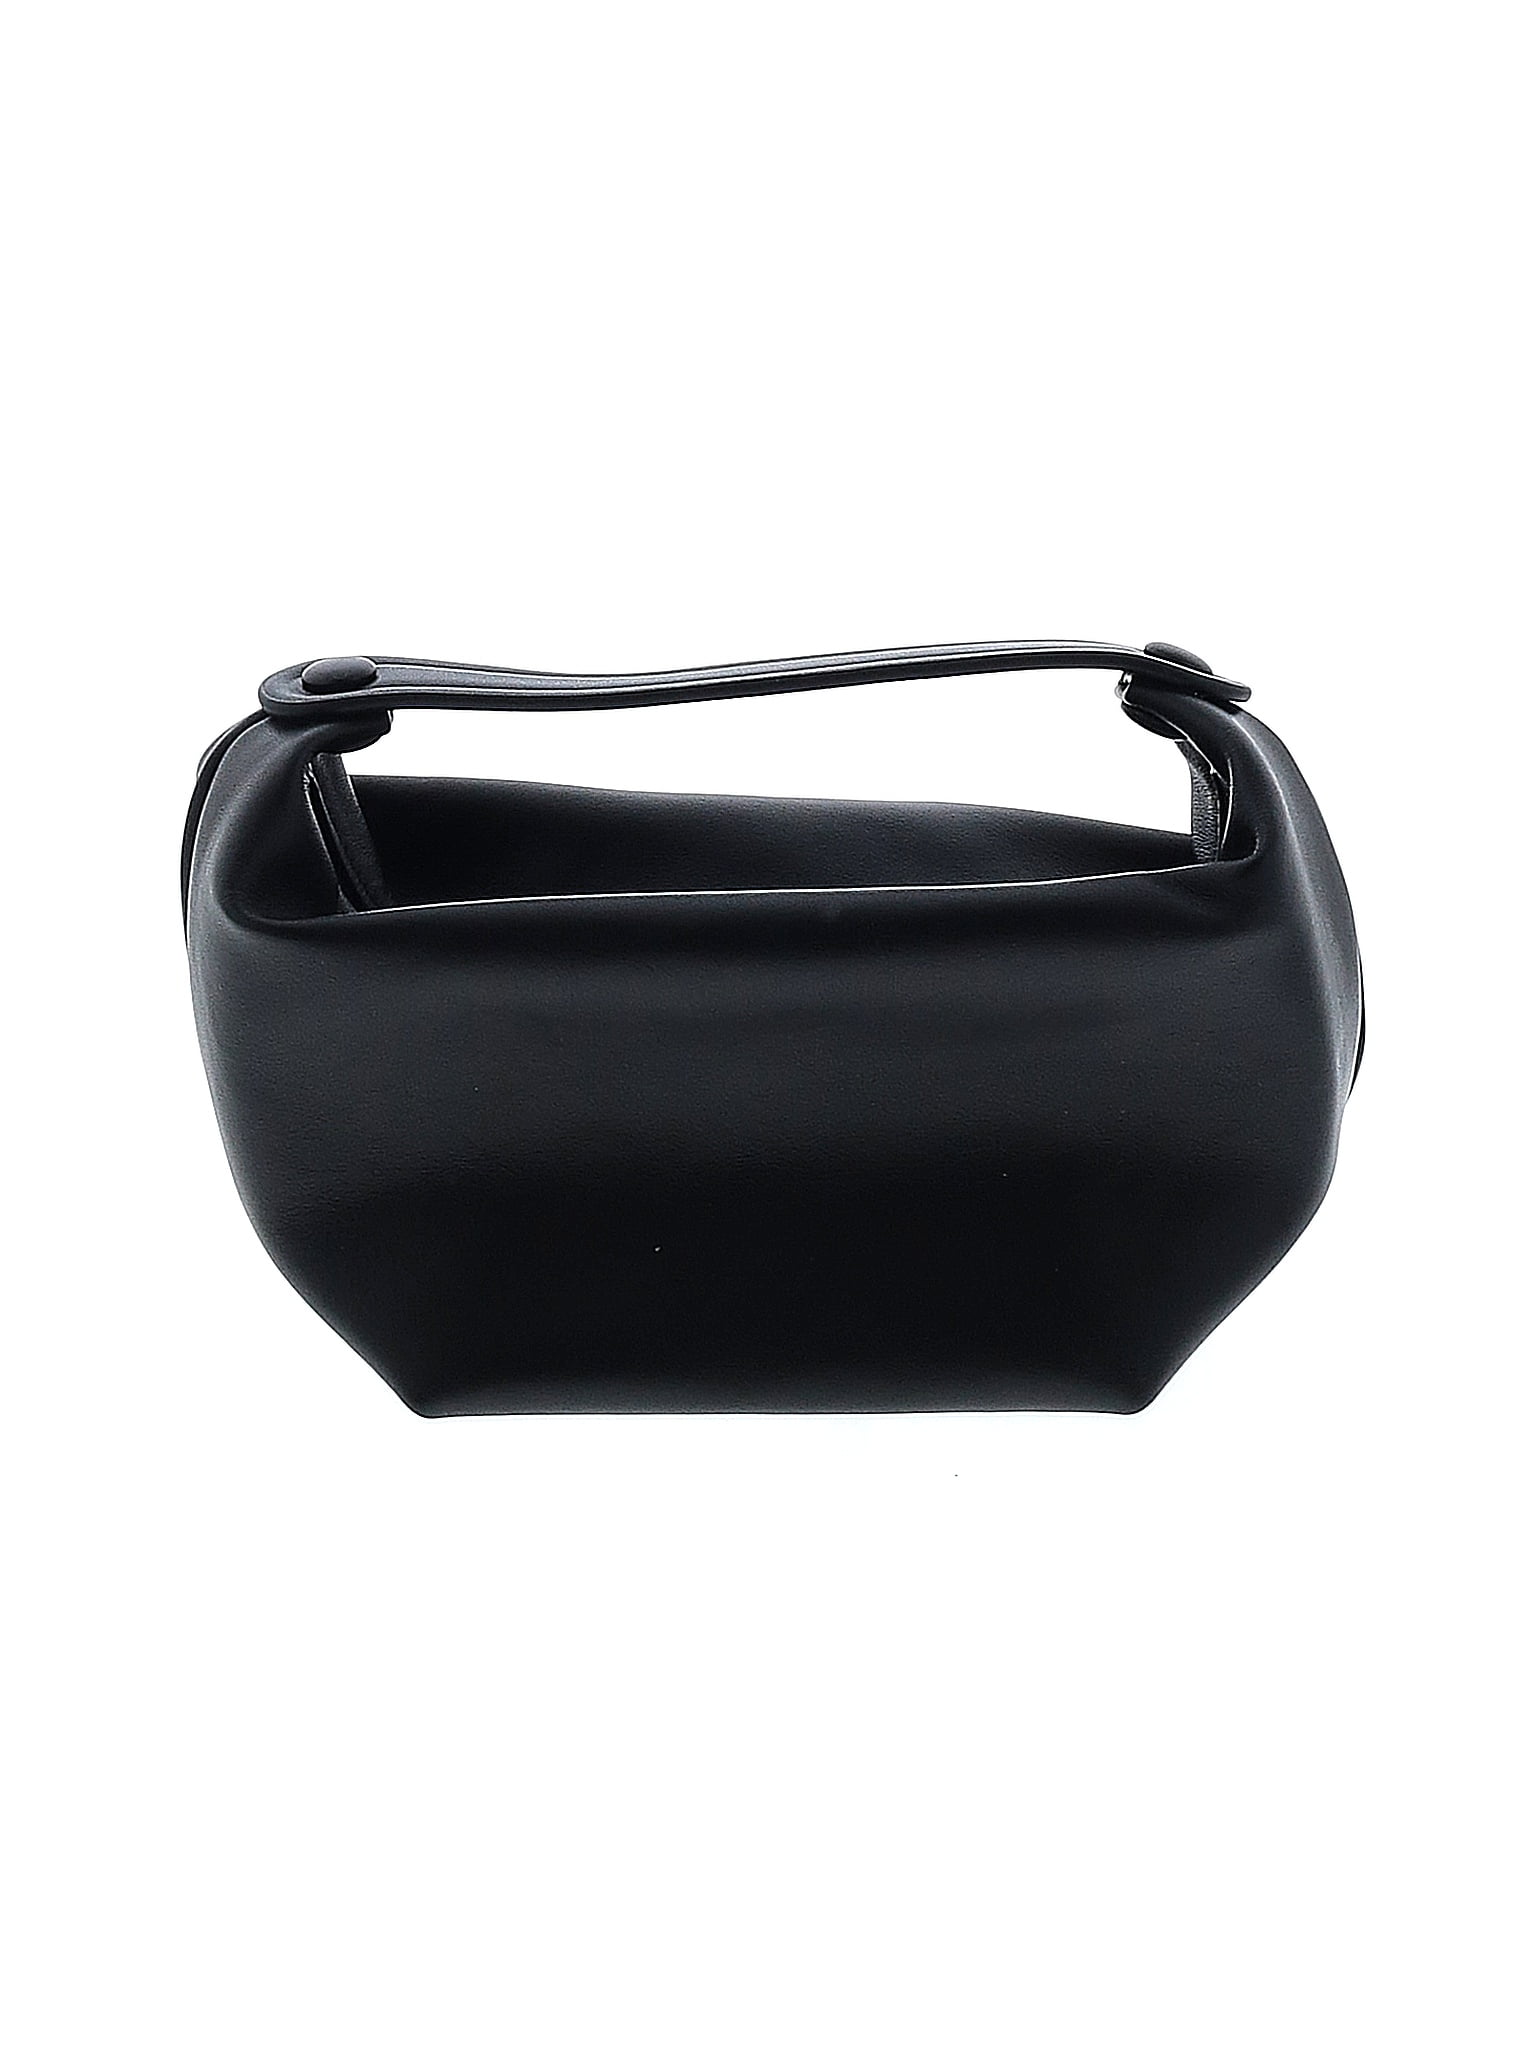 The Row Black Leather Clutch One Size - 68% off | thredUP